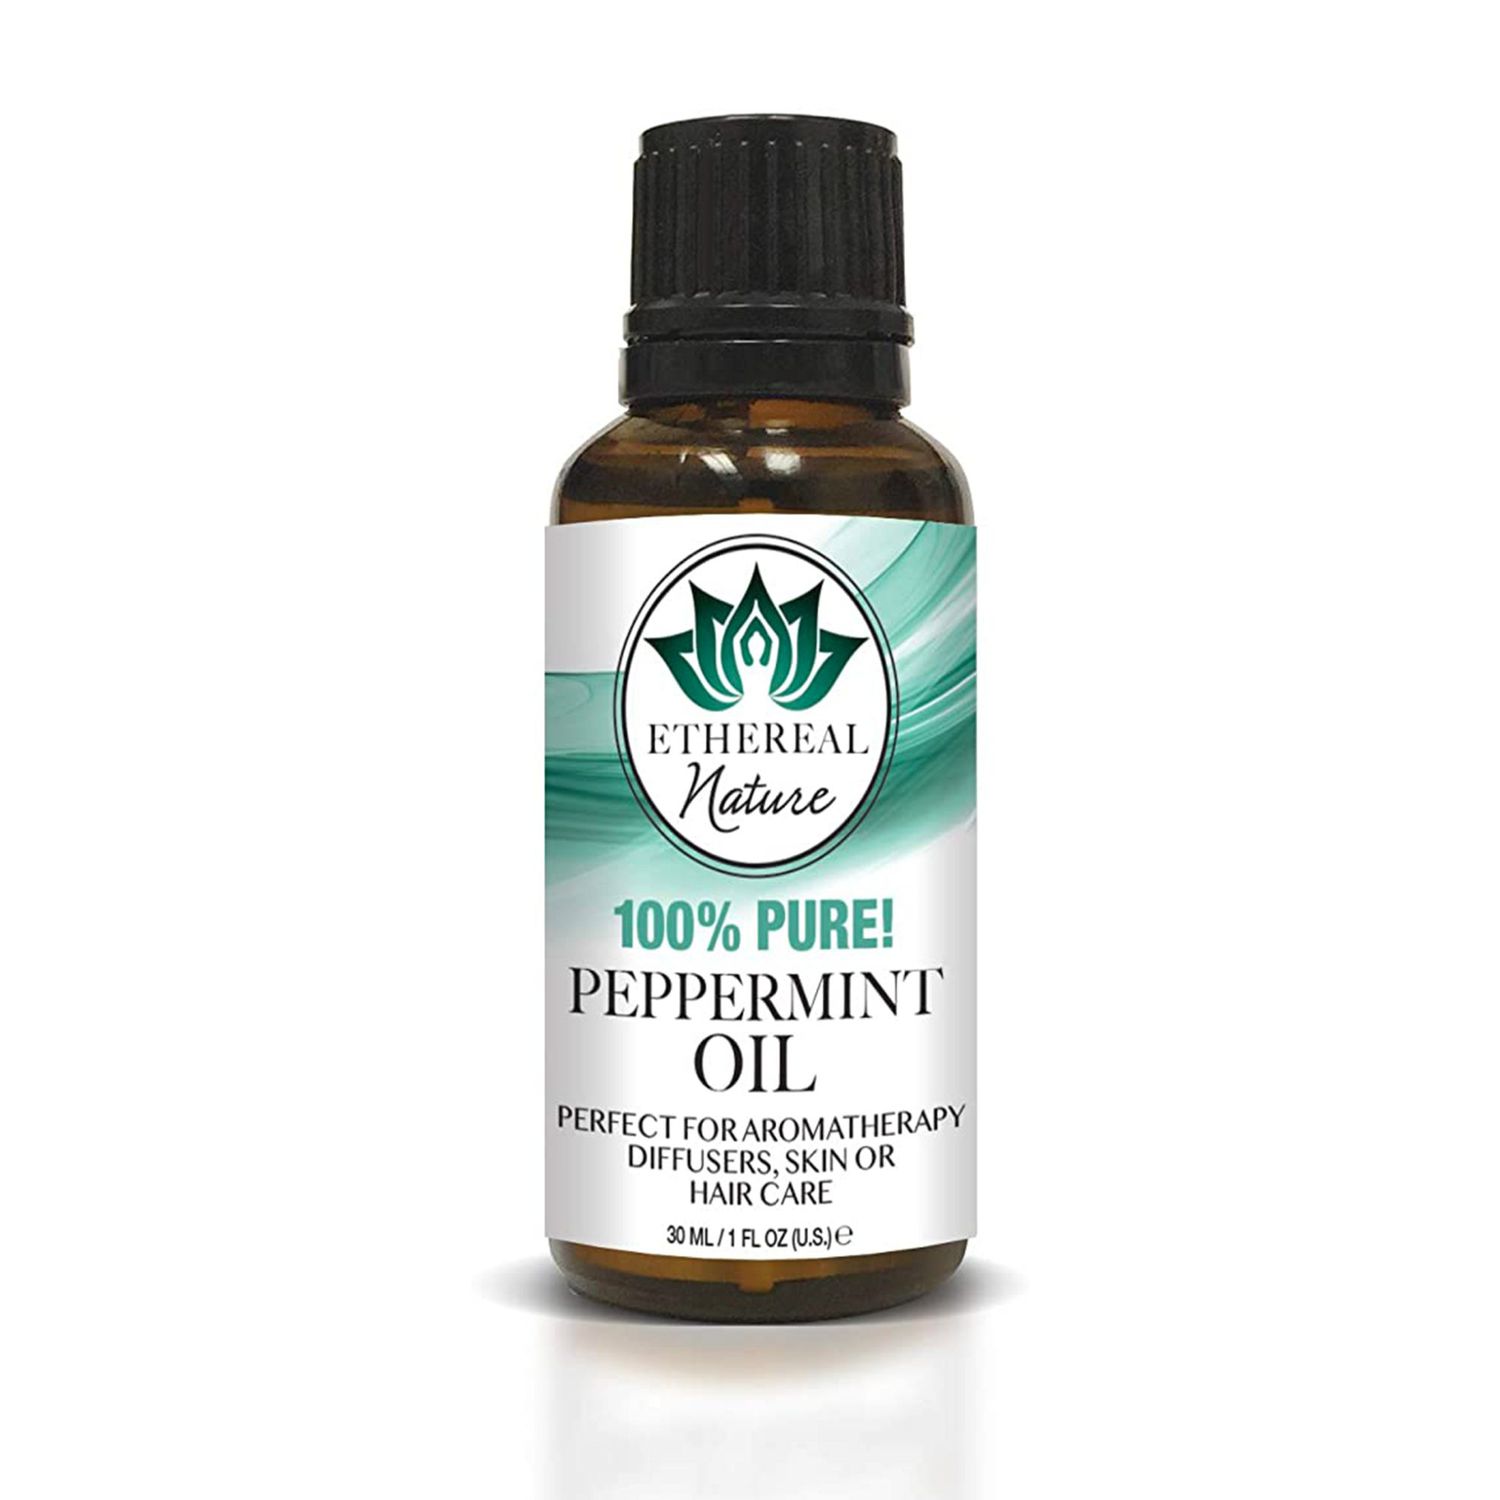 Ethereal-Nature-Peppermint-Oil-for-Hair-Growth-Products